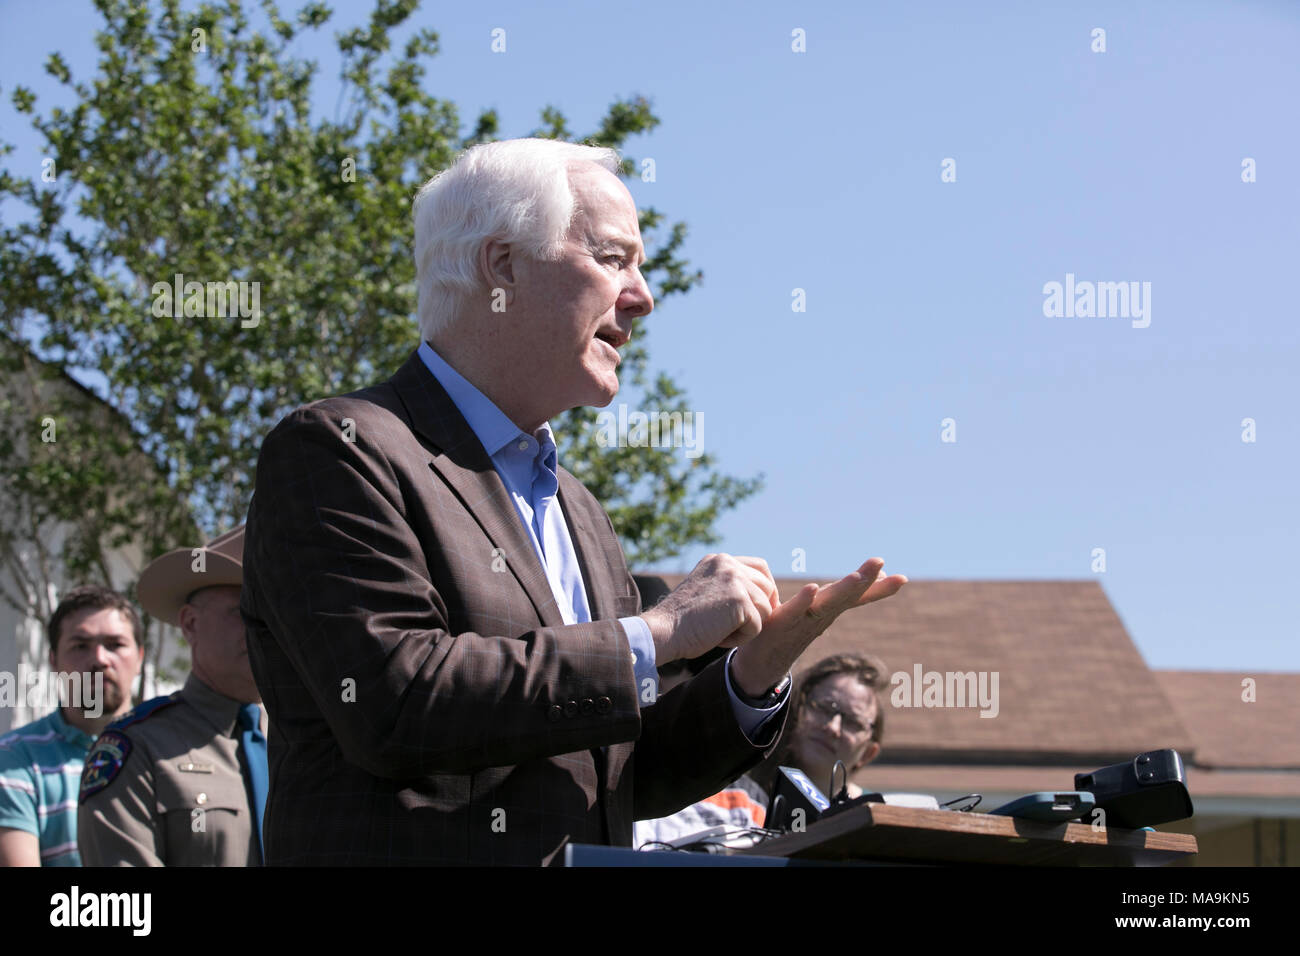 U.S. Sen. John Cornyn talks to the press about his Fix NICS Act, signed into law on March 23rd, in front of 1st Baptist Church of Sutherland Springs, TX, scene of a mass shooting in November 2017.  The bill strengthens criminal background checks intended to stop convicted felons and domestic abusers from purchasing firearms. Stock Photo